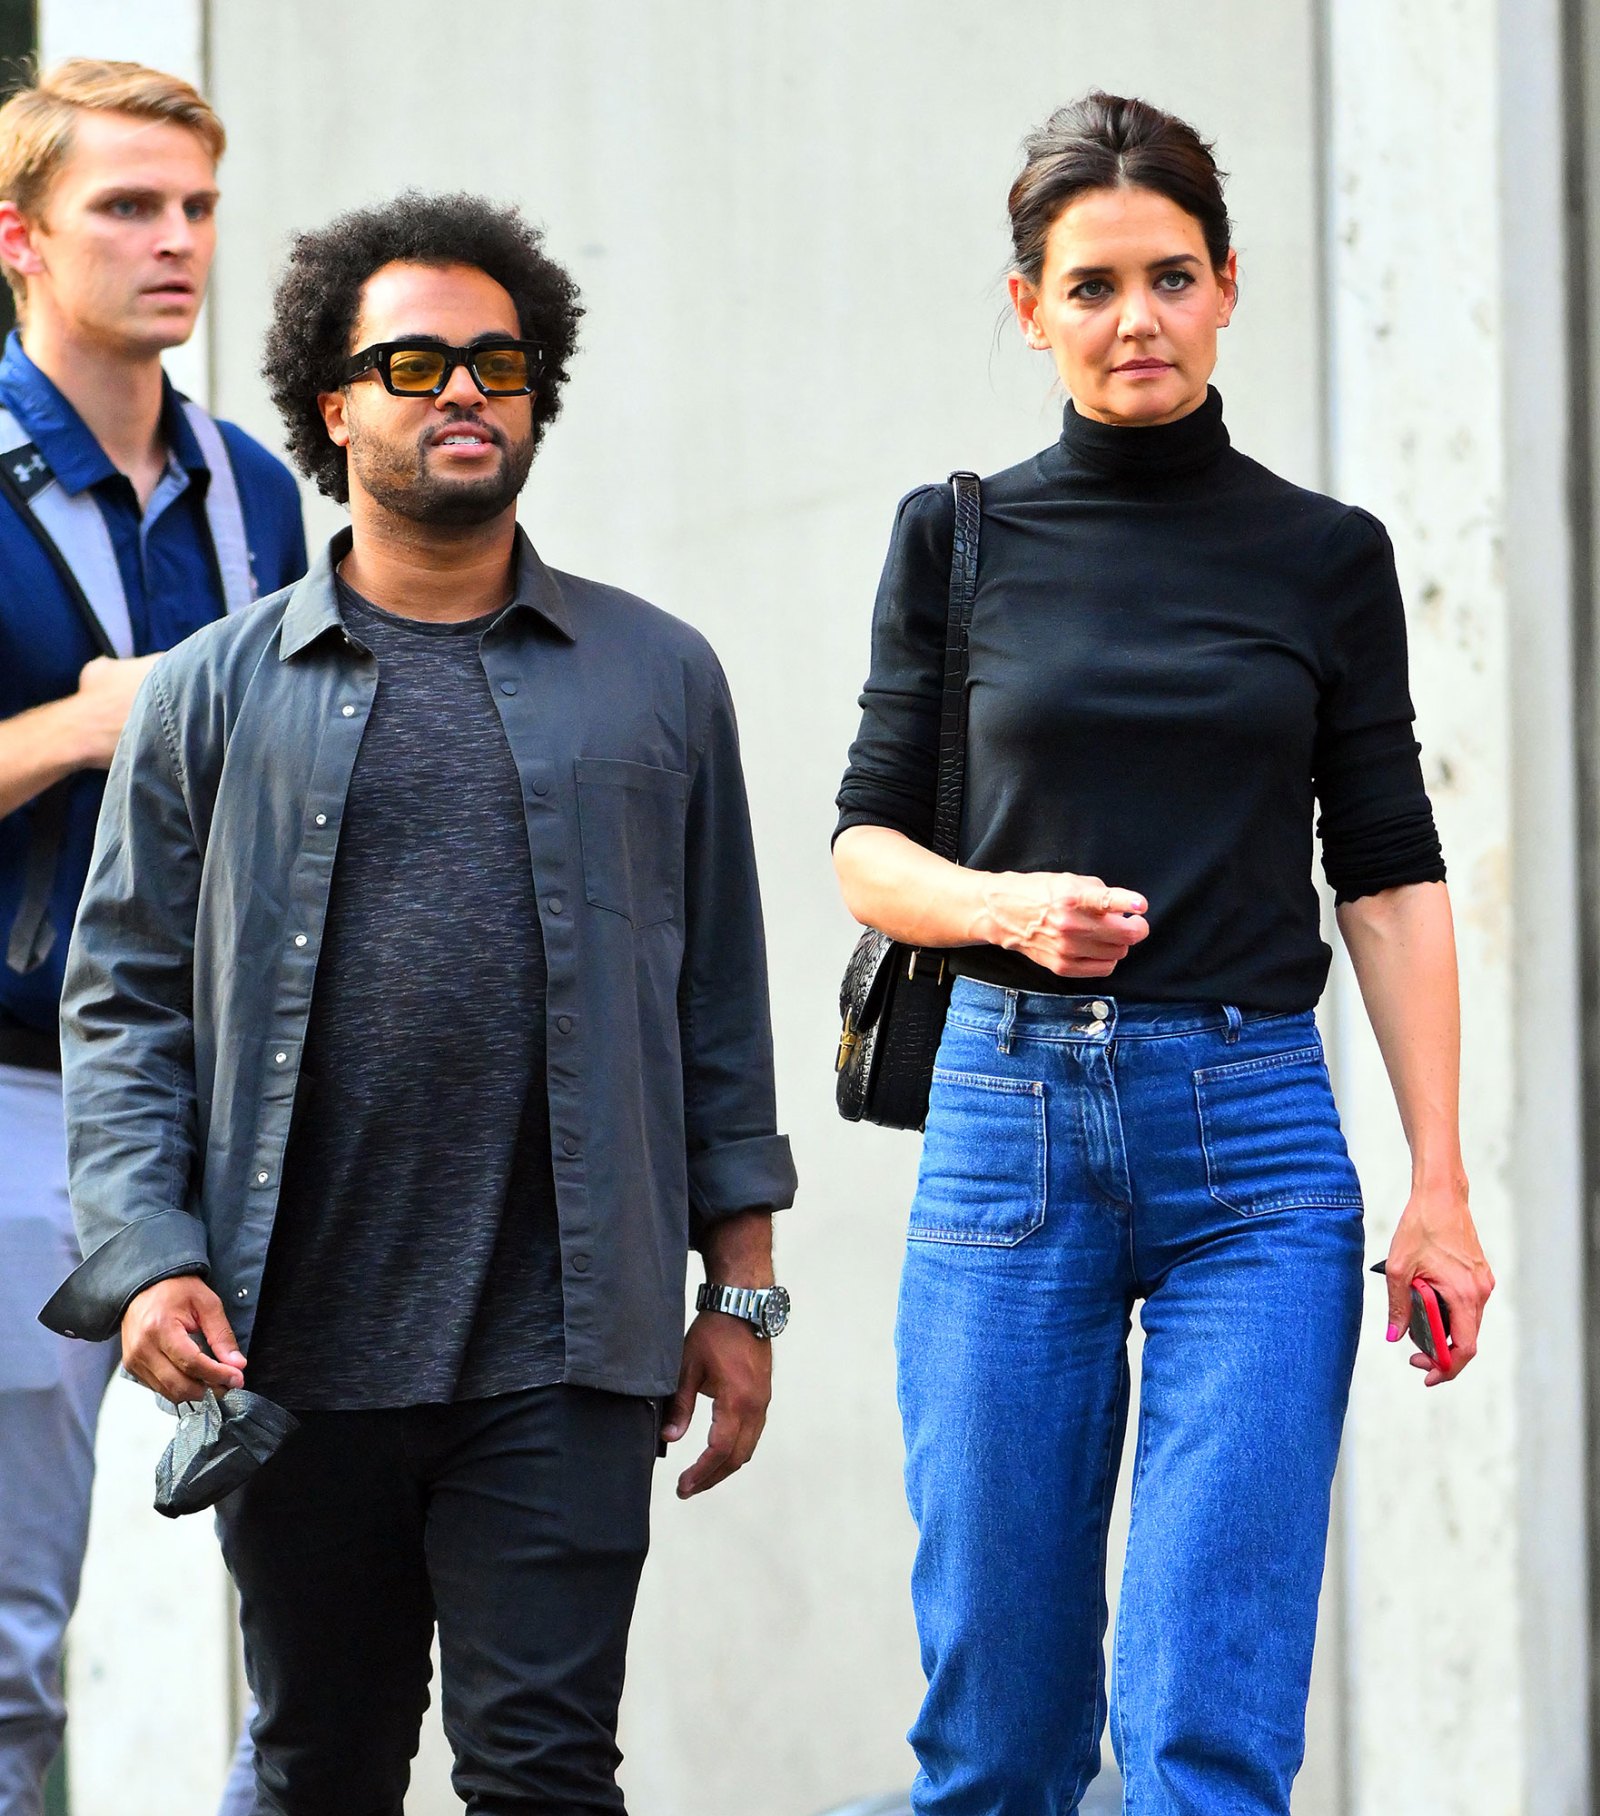 Katie Holmes and Boyfriend Bobby Wooten lll Step Out for Romantic Date Night in NYC